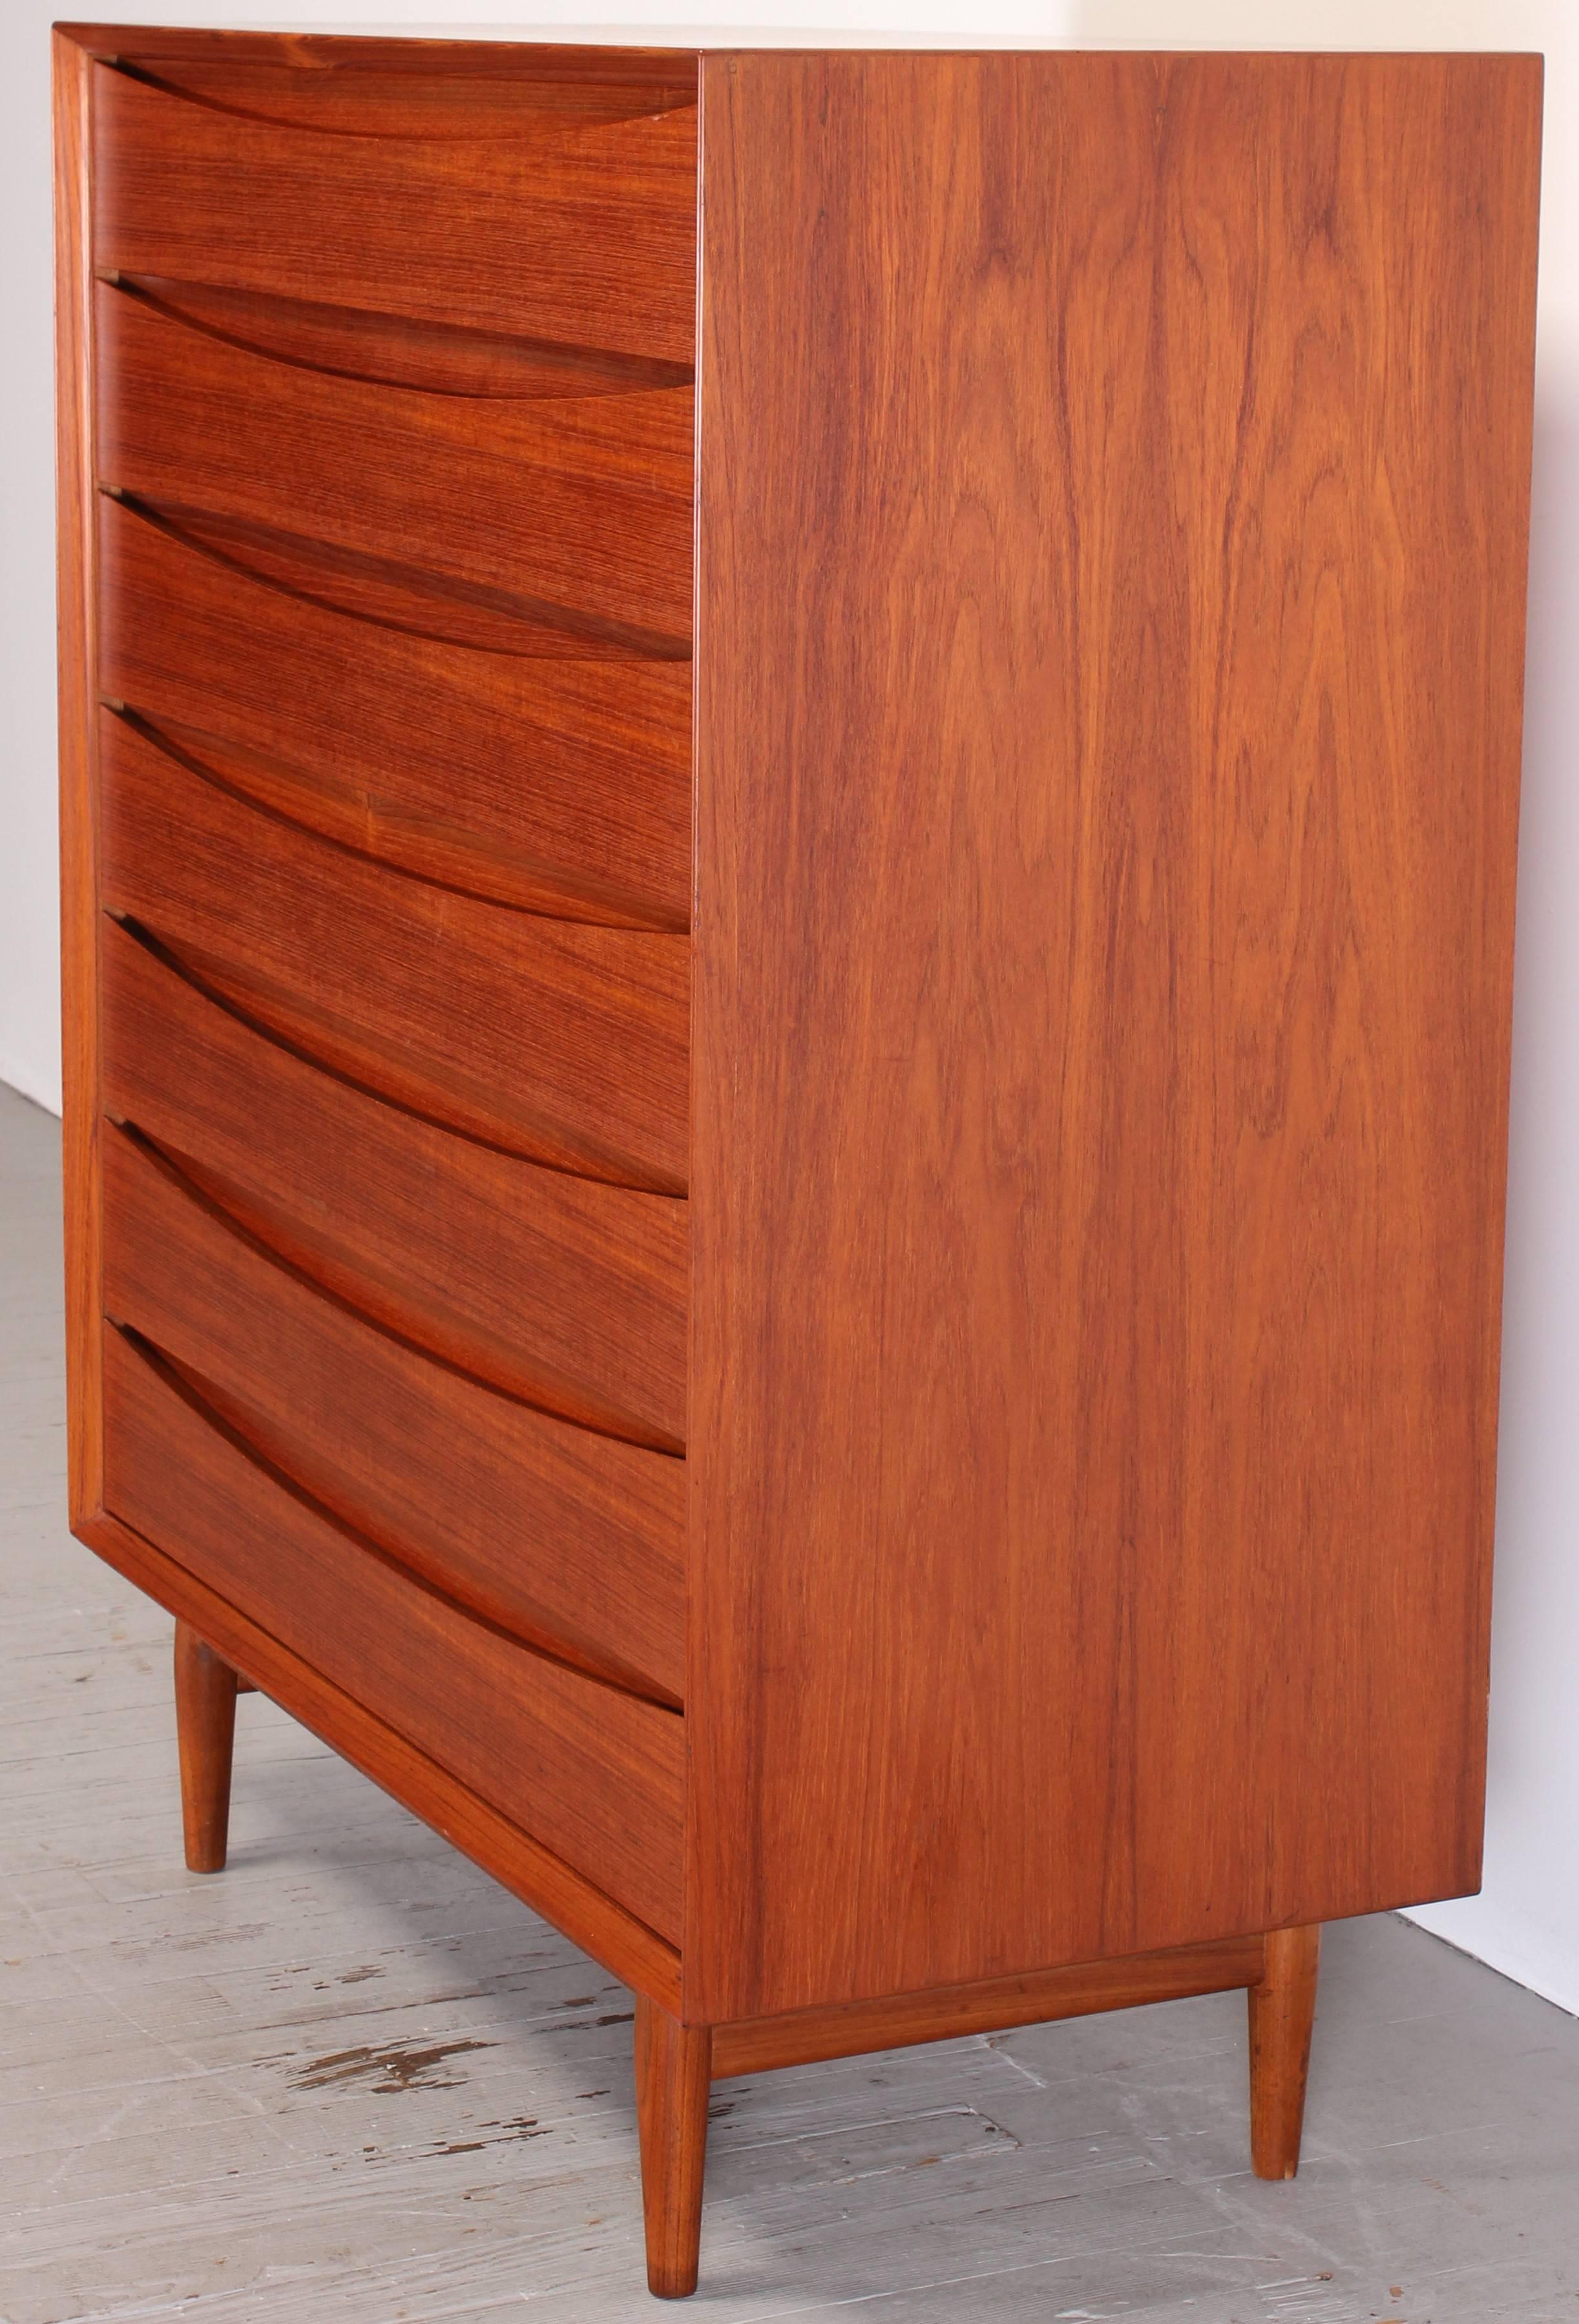 Arne Vodder designed seven drawer teak tall chest for Sibast of Denmark. The dresser is in excellent vintage condition, drawers slide nicely. The handsome,  soundly built bureau is ready to be used. 